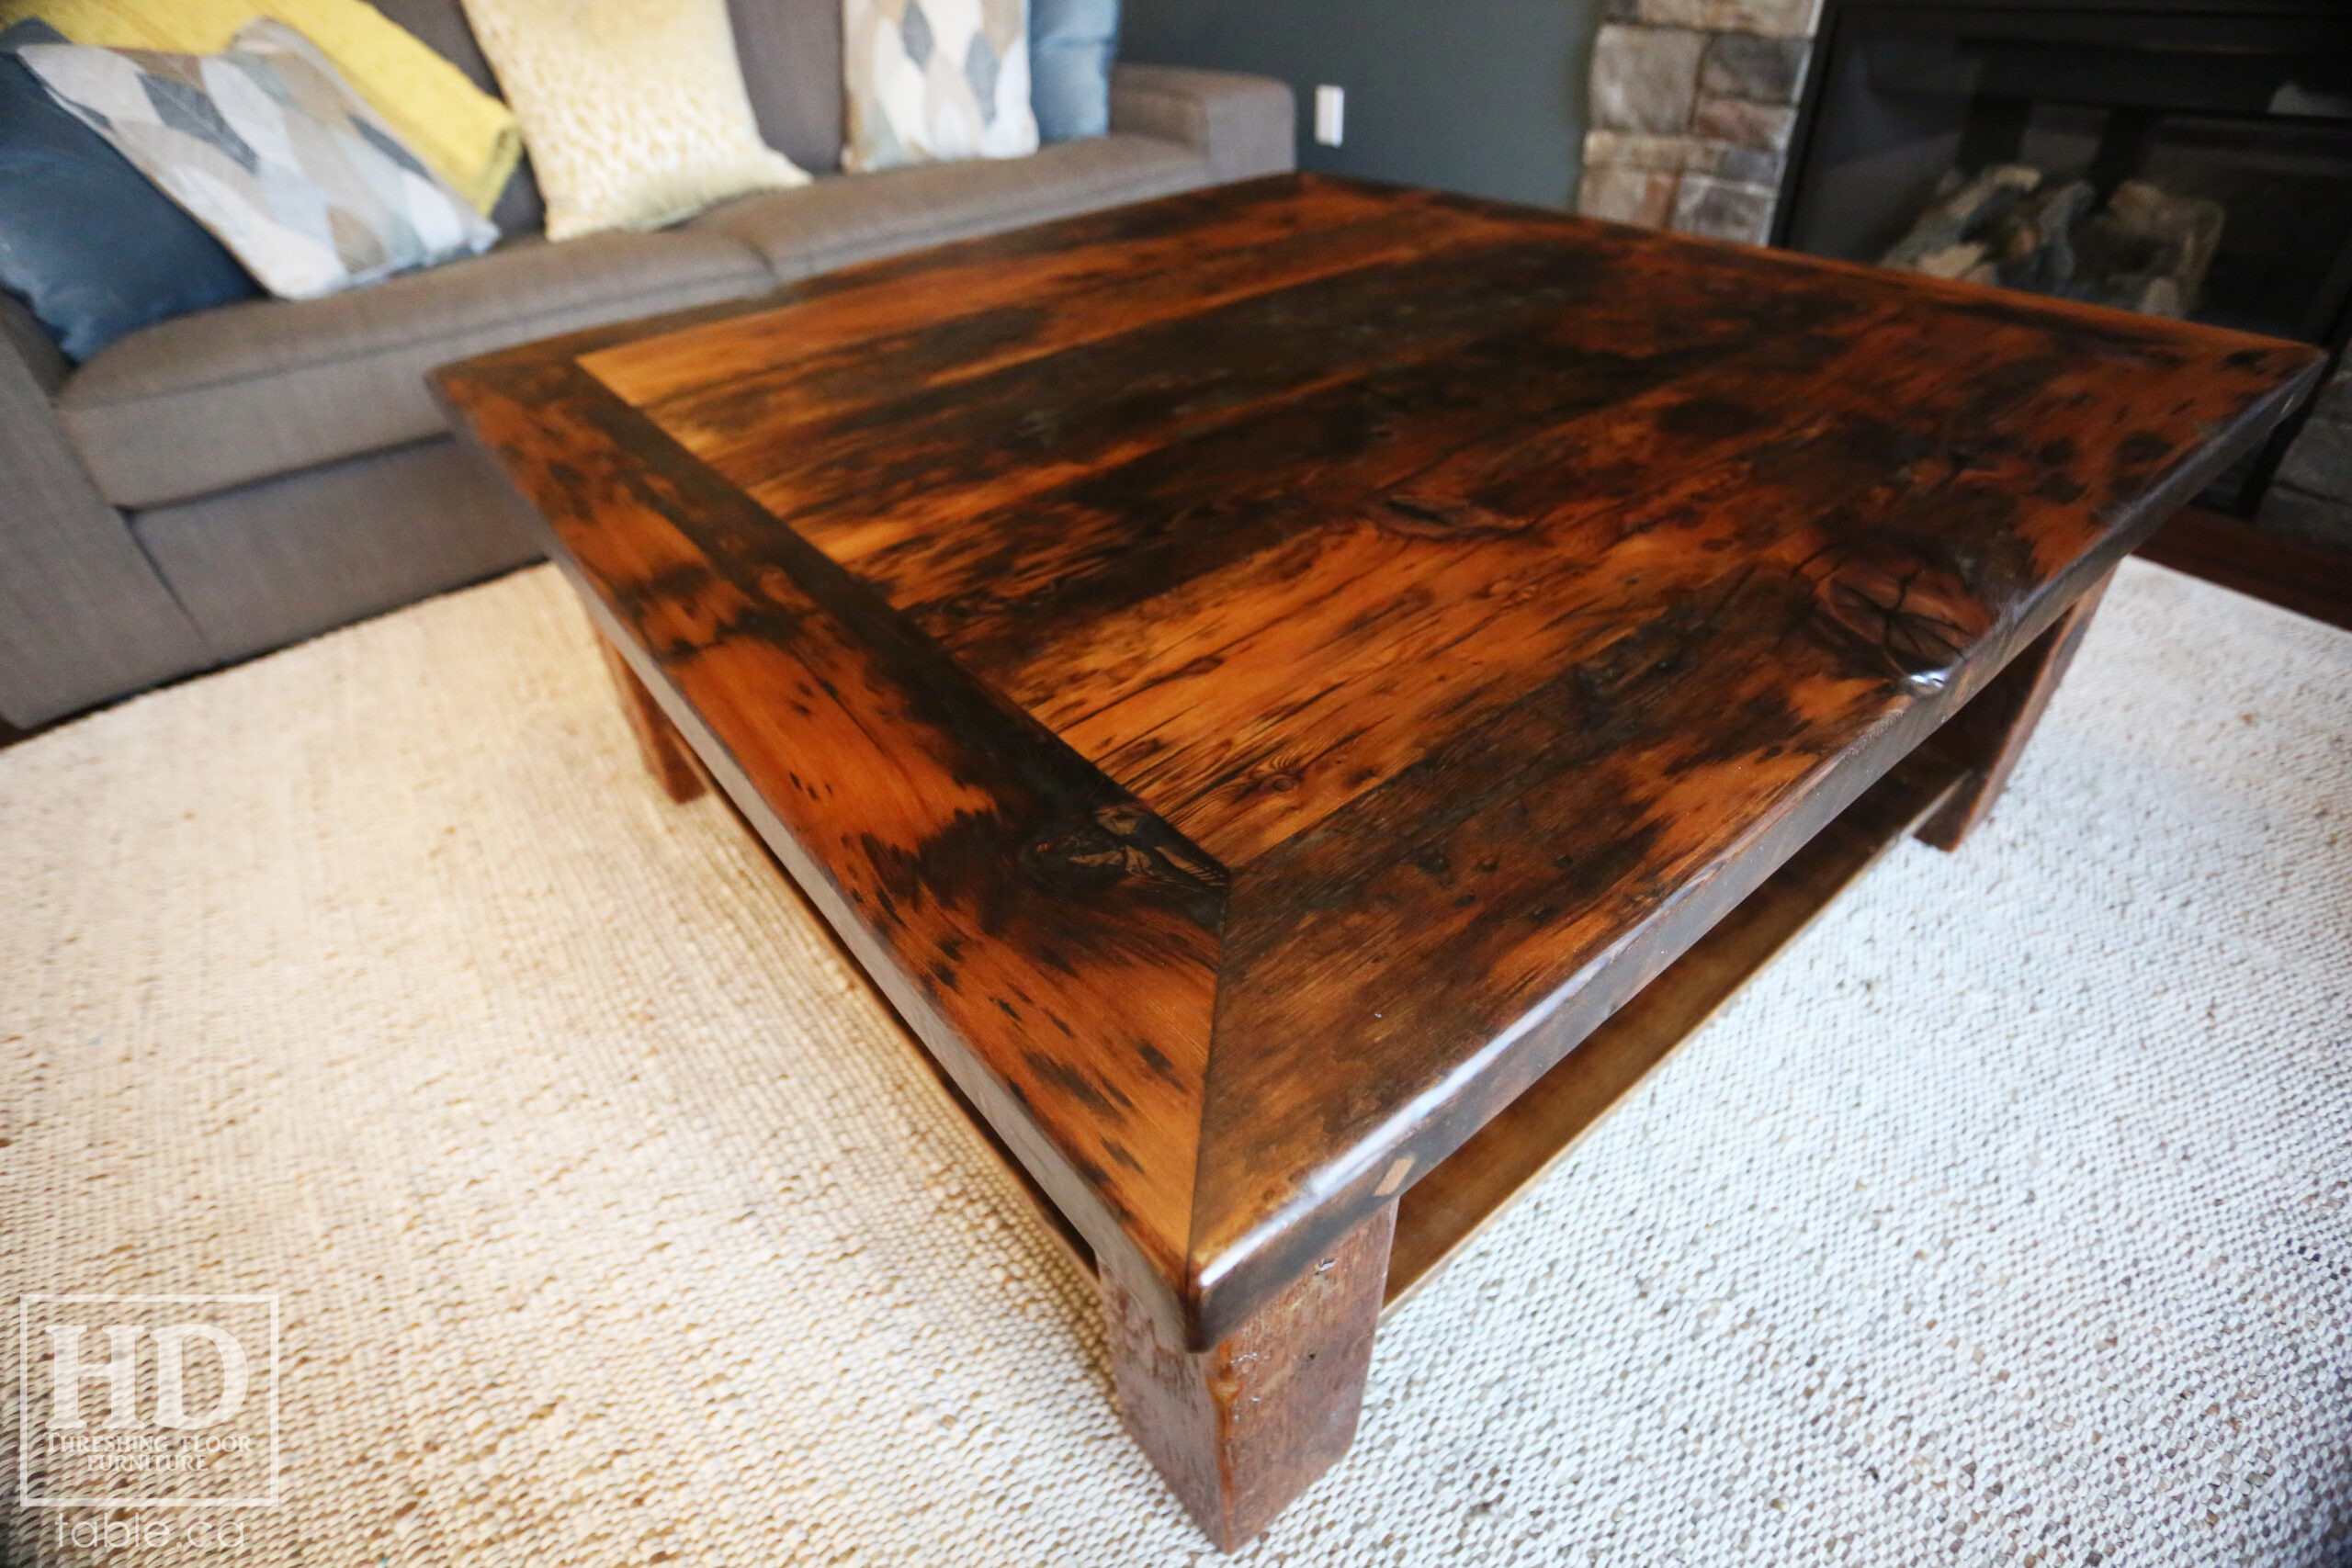 44" x 44" Ontario Barnwood Coffee Table we made for a Guelph home - 18" height - Old Growth Reclaimed Hemlock Threshing Floor Construction - Straight 4"x4" Windbrace Beam Legs -  Bottom 1" Grainery Board Shelf - Original edges & distressing maintained - Premium epoxy + matte polyurethane finish - www.table.ca